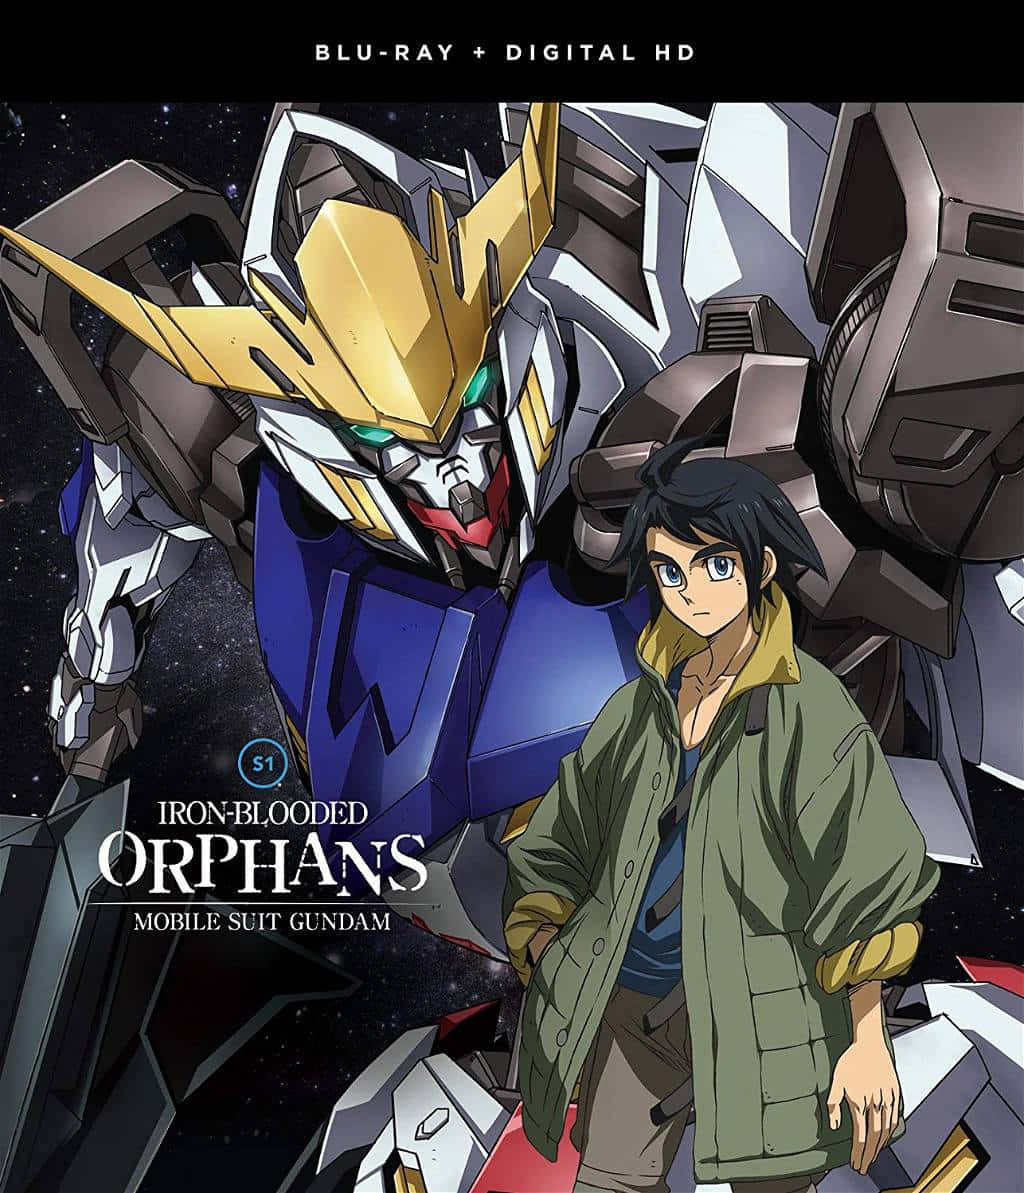 Image  "Mobile Suit Gundam Iron-Blooded Orphans: Bringing Peace to a Chaotic World" Wallpaper